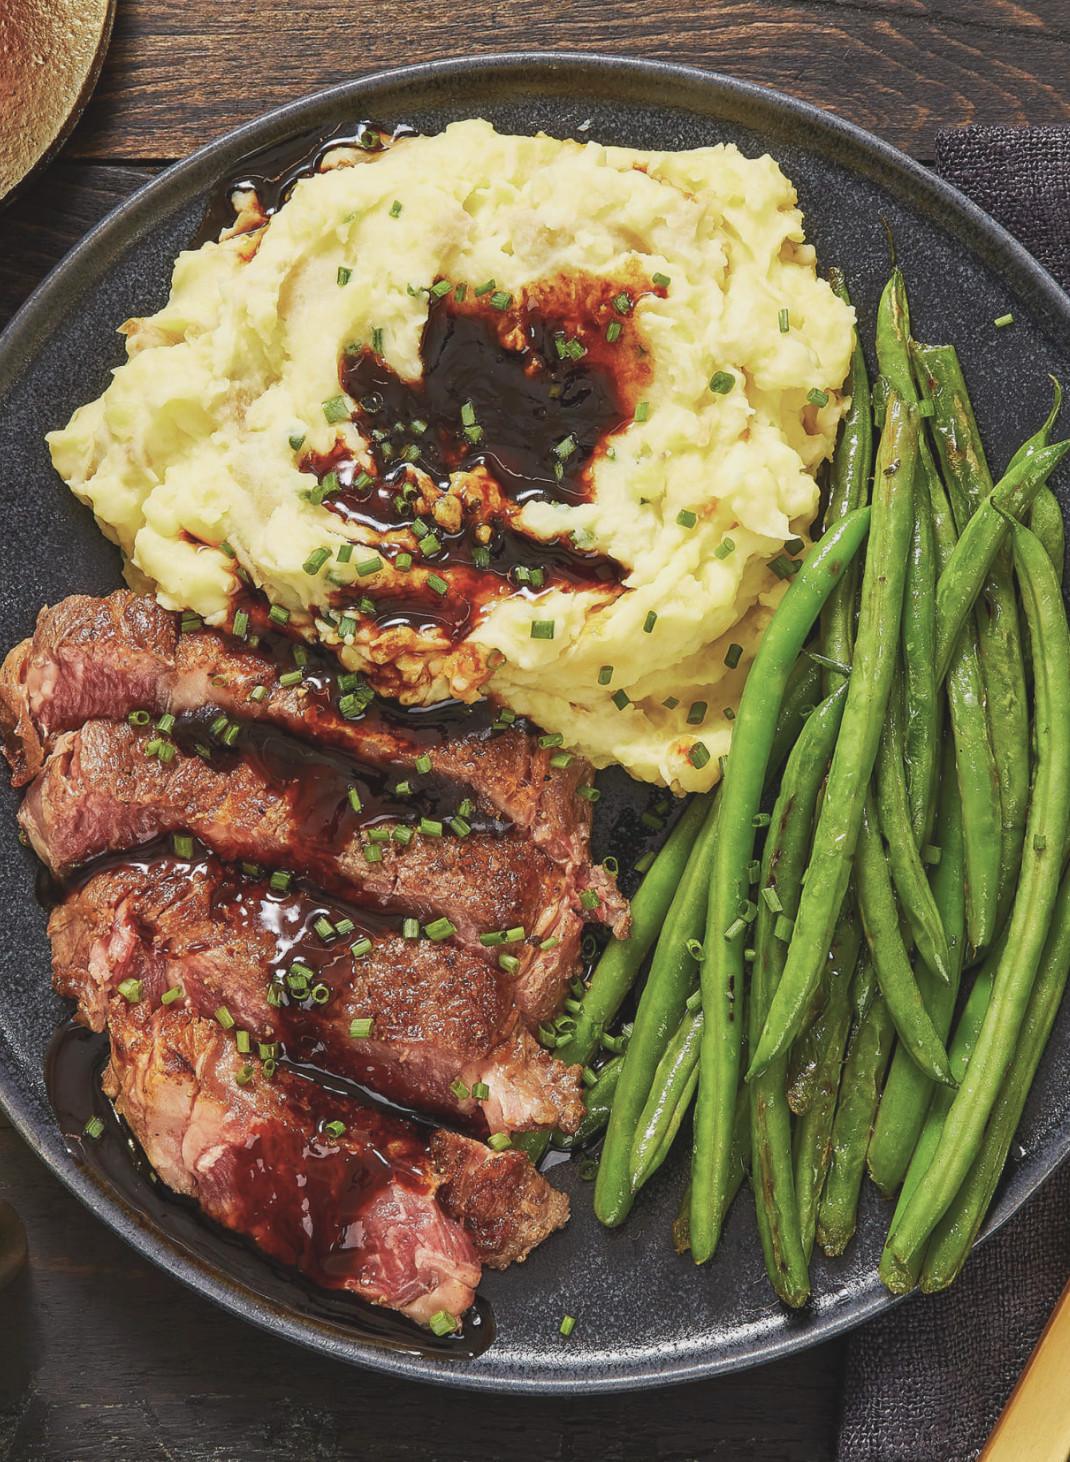 Gourmet Mashed Potatoes Recipes
 Easy gourmet steak recipe with mashed potatoes and green